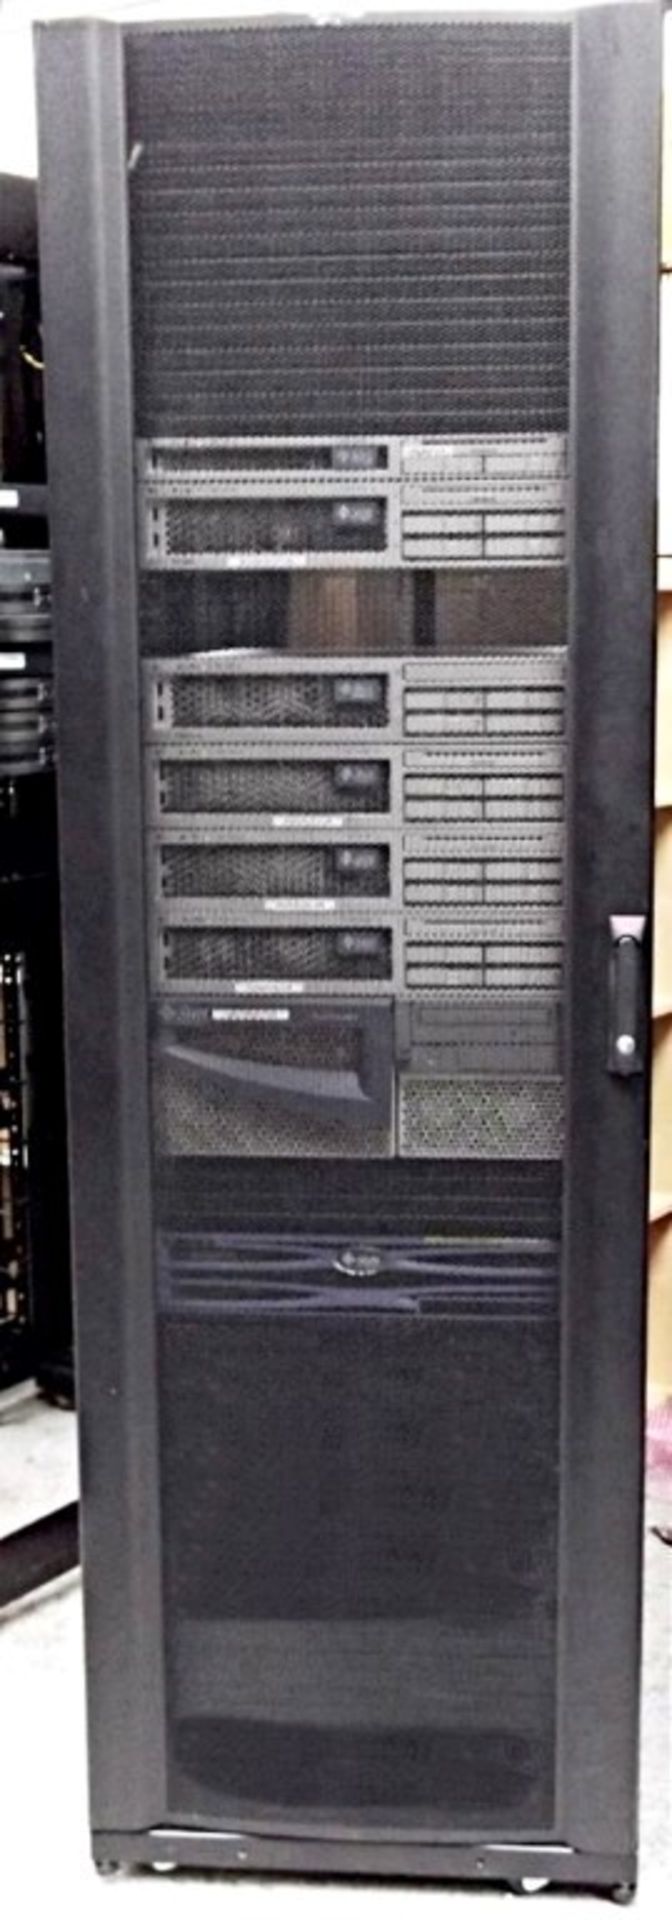 1 x APC Netshelter Server Rack With With 8 x Assorted Sun Fire Servers (V & X-Series) - Ref: